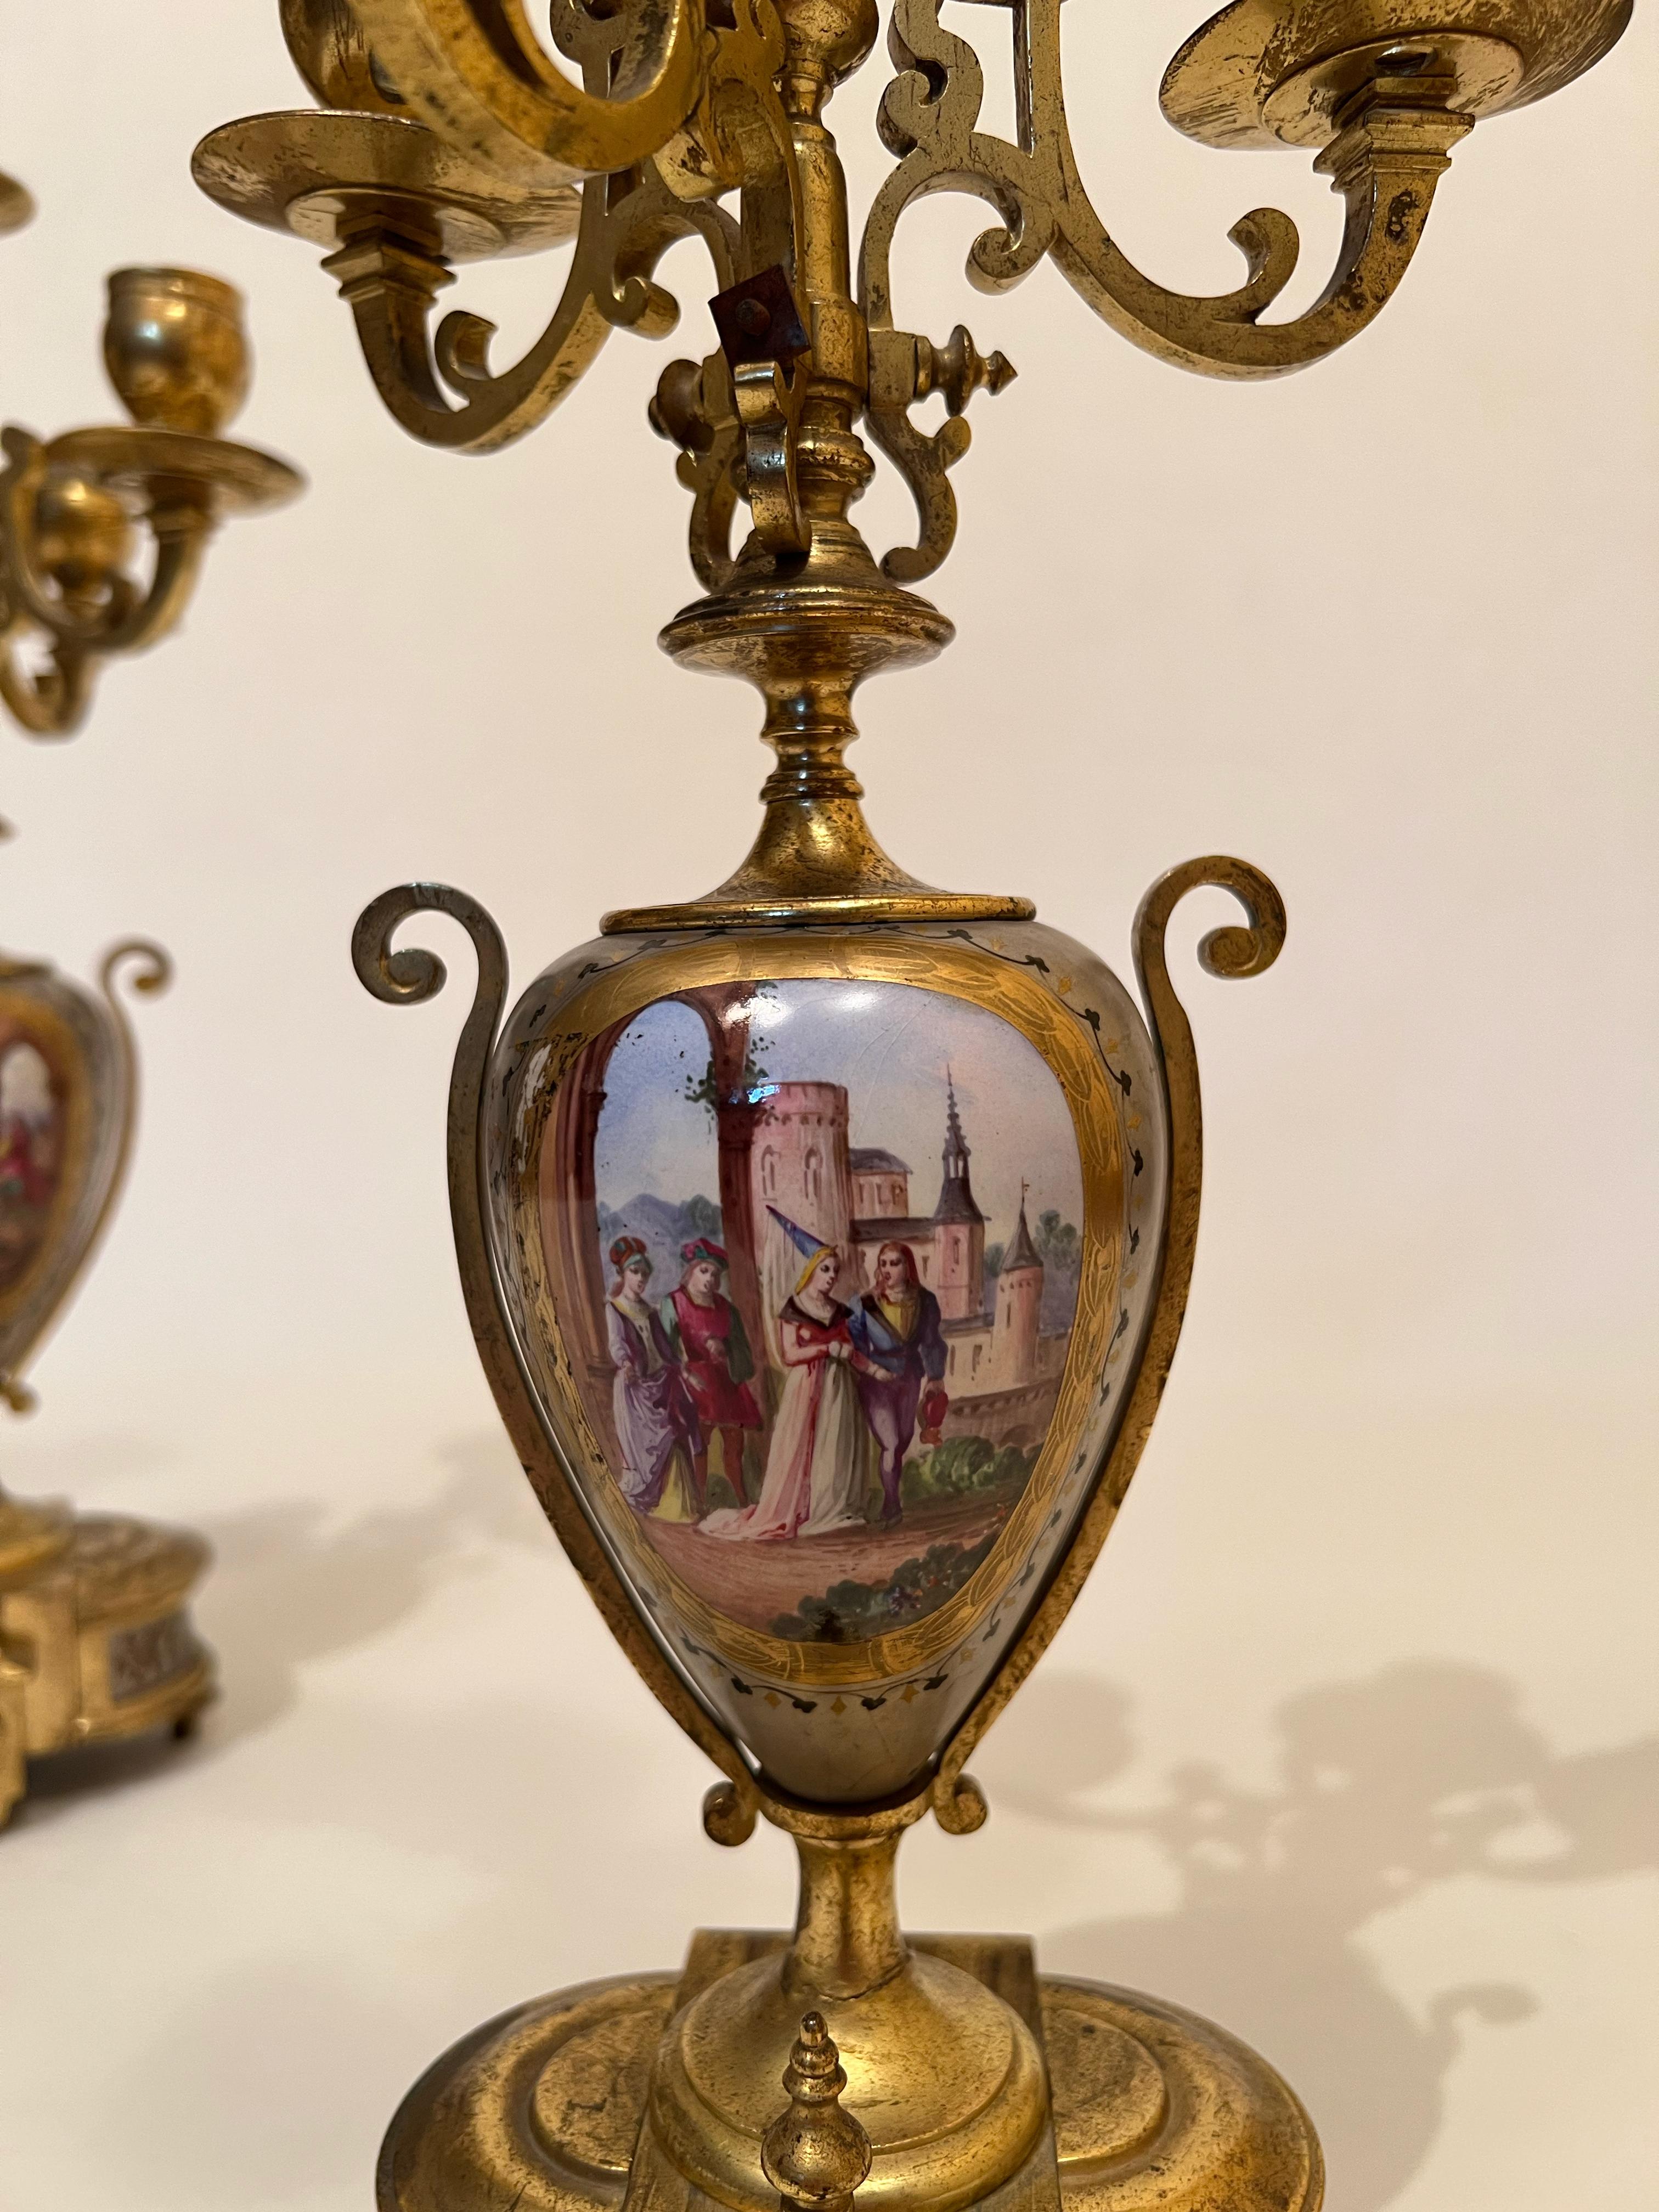 Pair of bronze candelabra with double-sided paintings 19th century. The paintings, finely executed on the bronze with oil tempera, depict noble figures and landscapes. Both painting and manifacture are from the same period. 
Originally created as